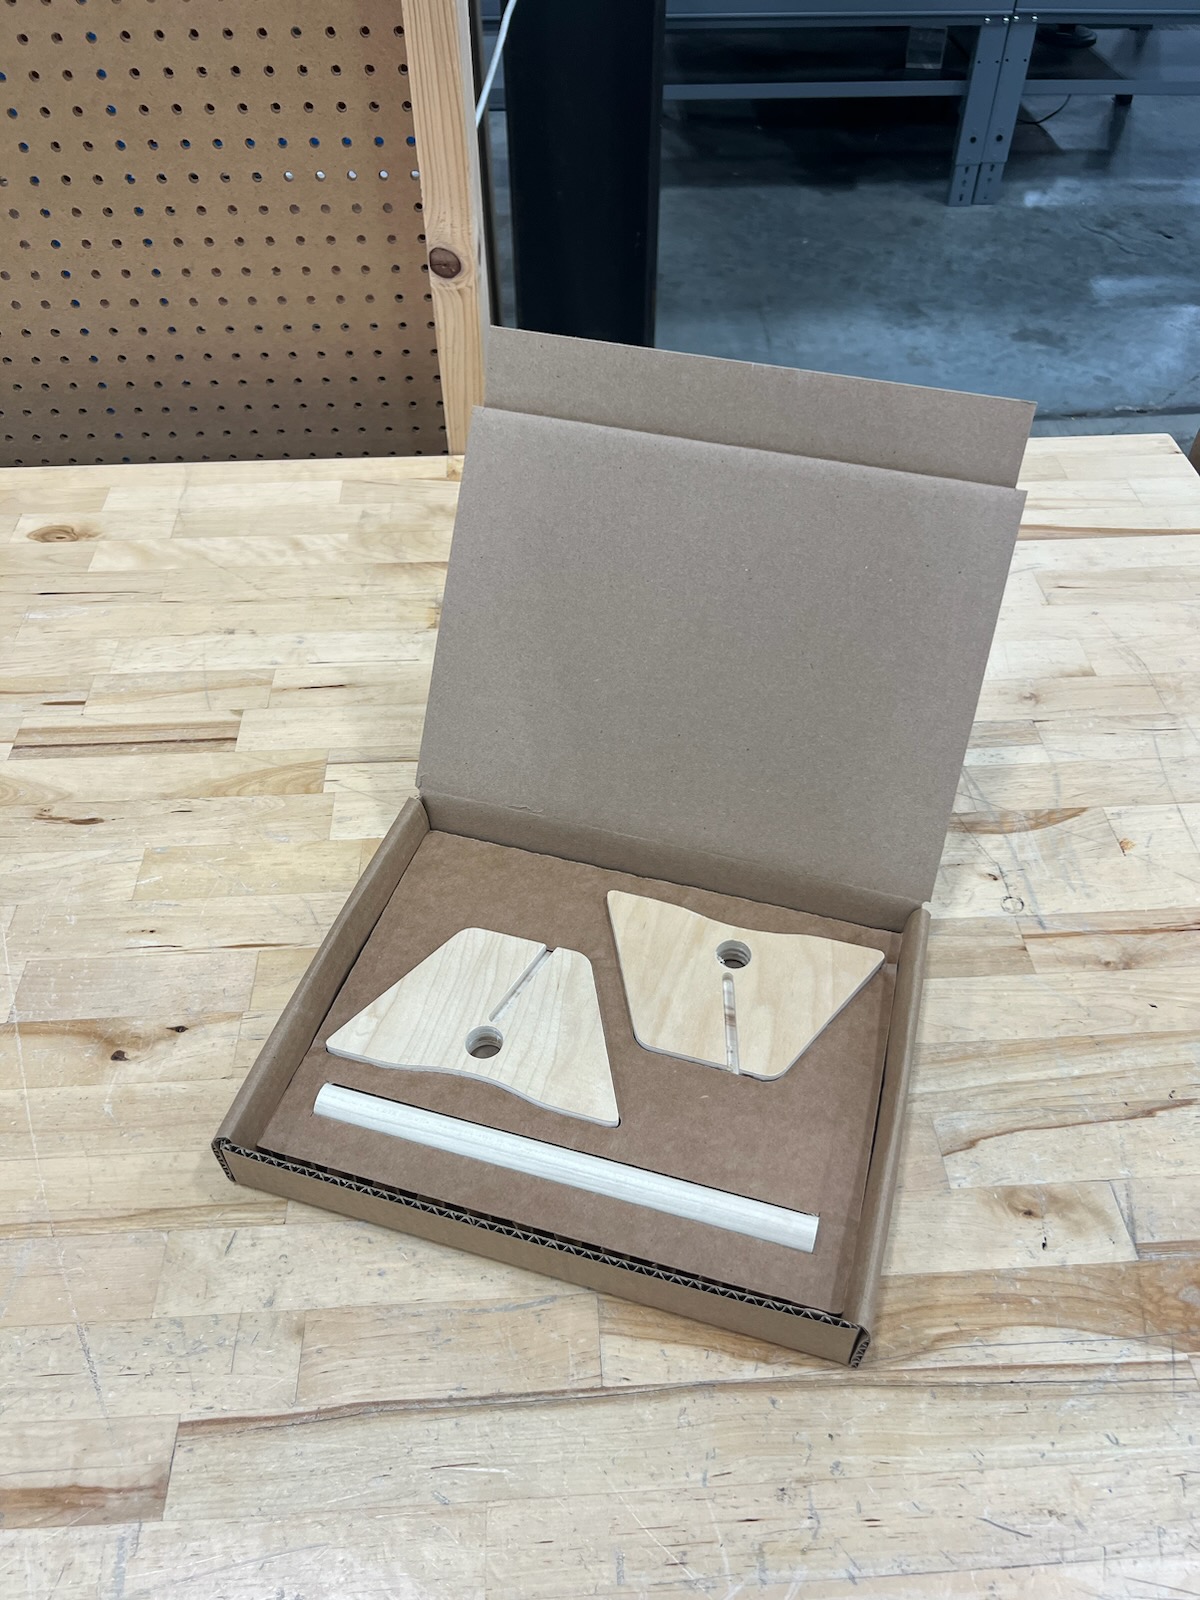 flat-pack cardboard shipping with no foam